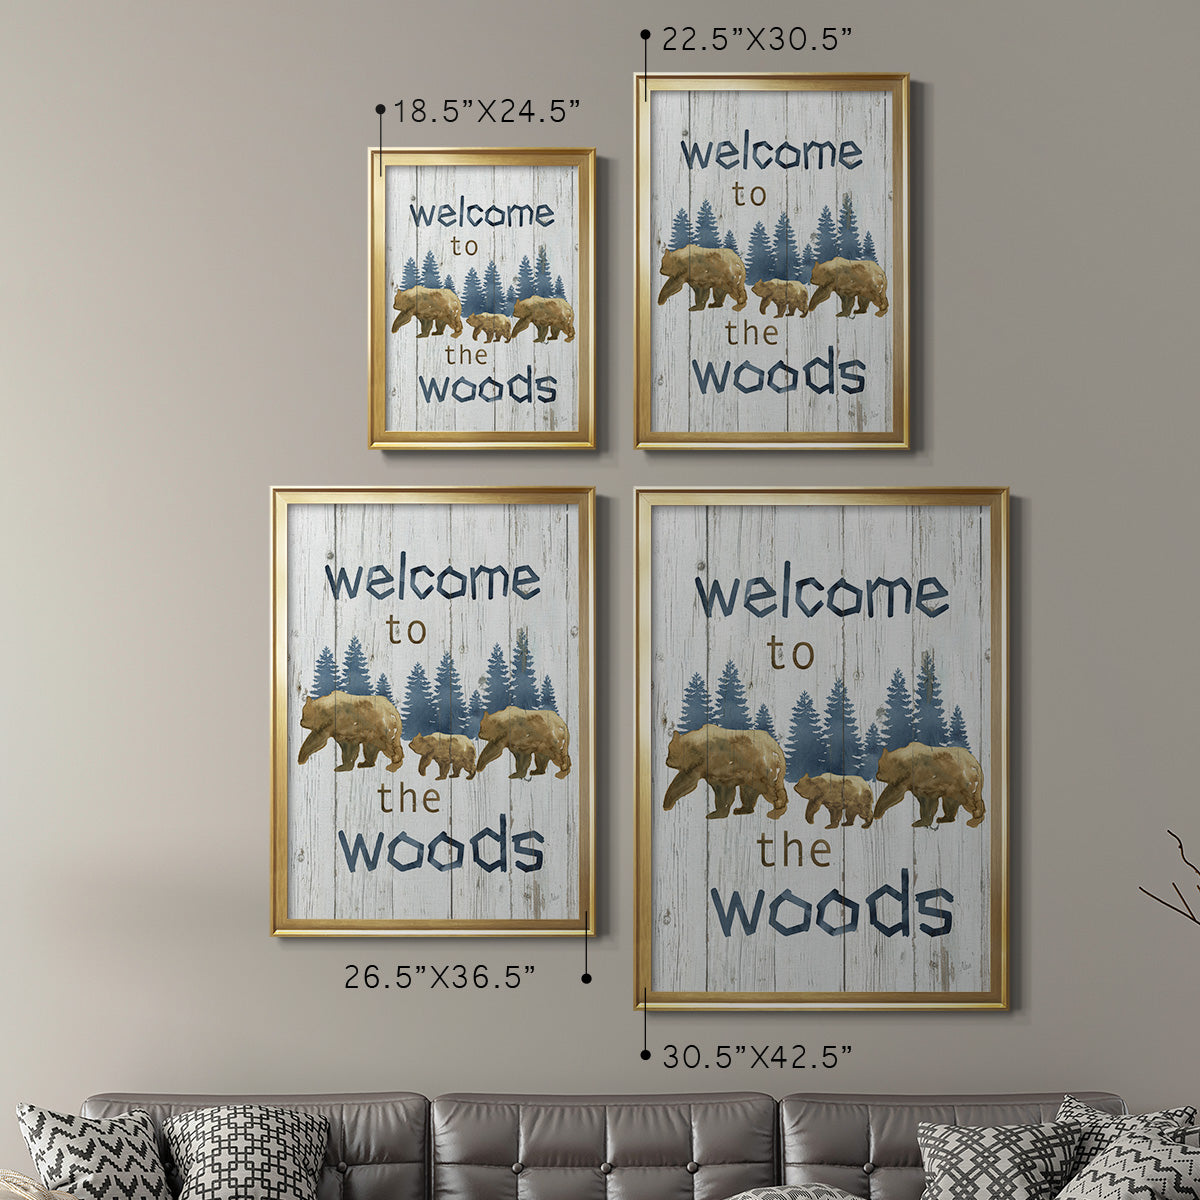 Welcome to the Woods Premium Framed Print - Ready to Hang